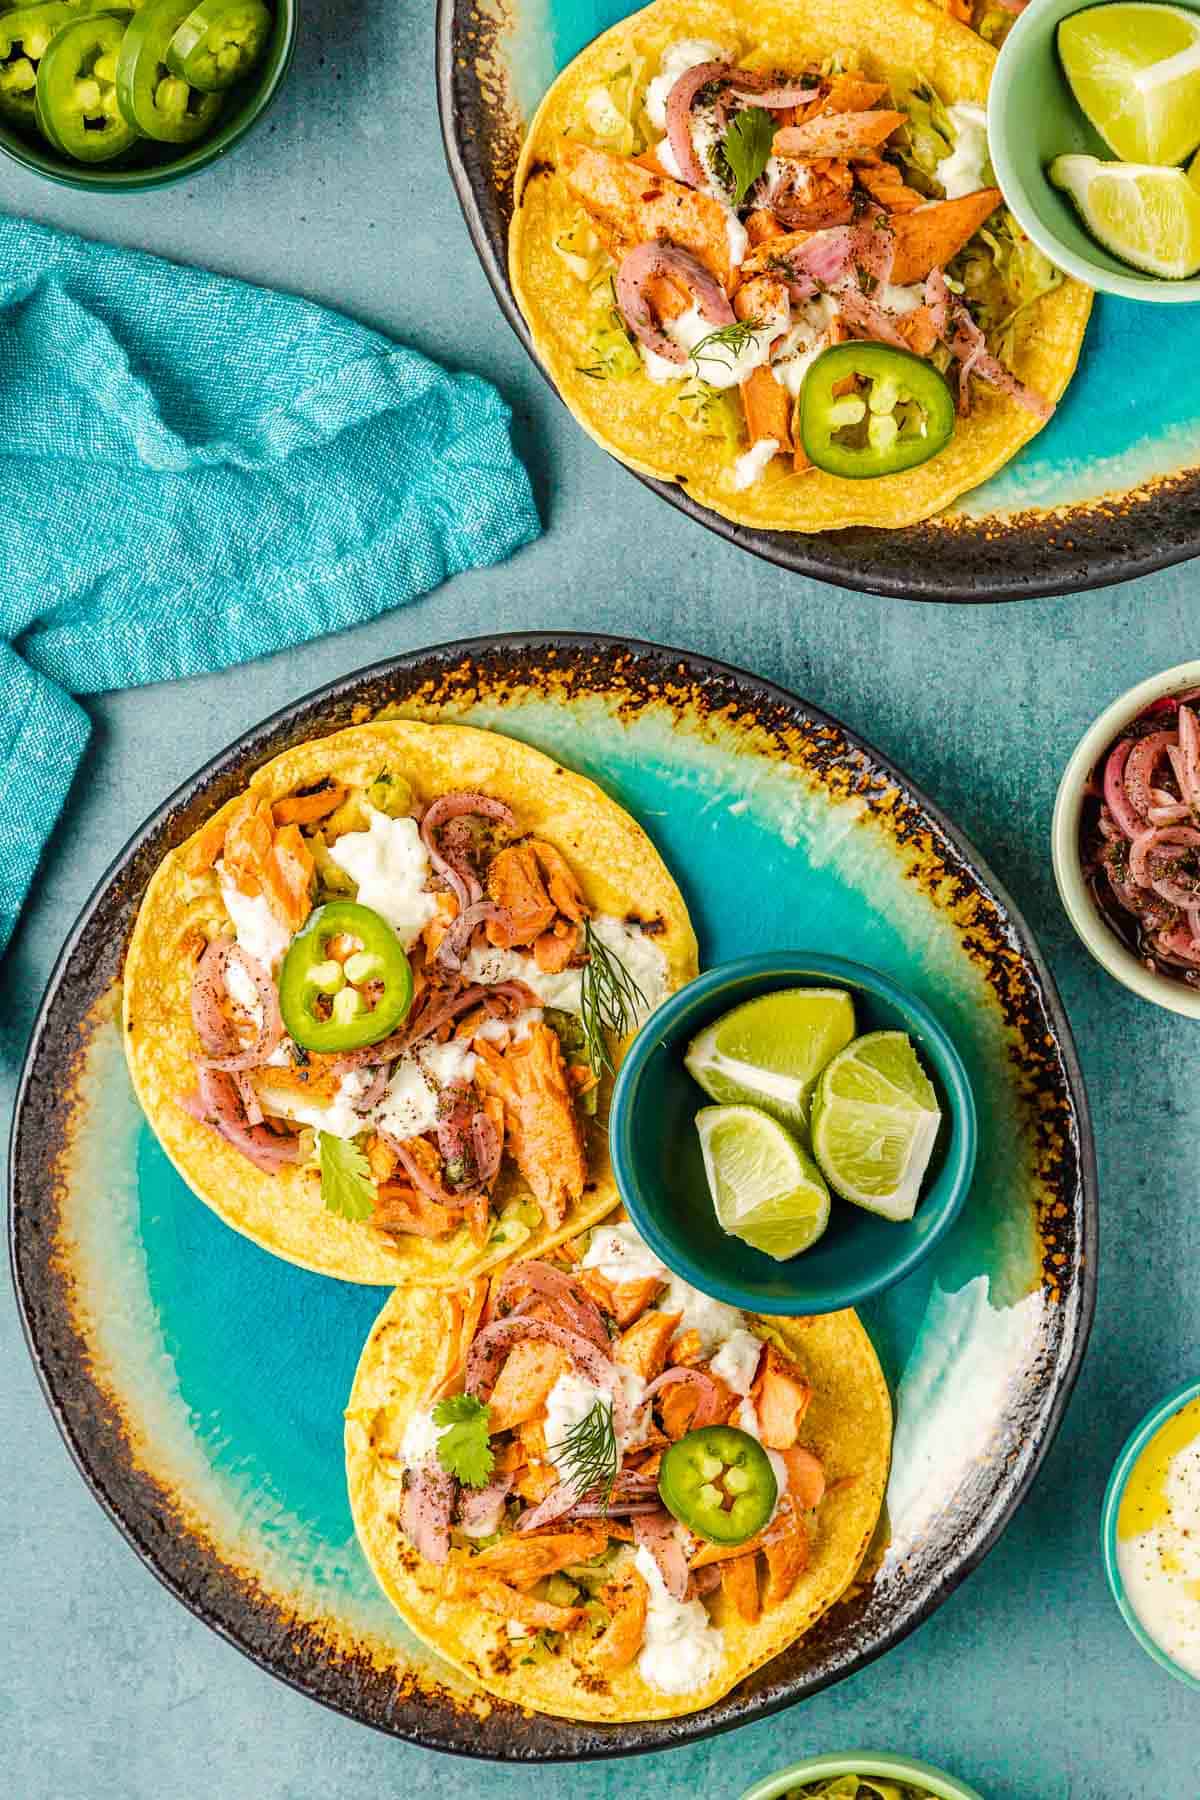 two open salmon tacos on corn tortillas and a bowl of 3 lime wedges on a plate, with another plate of salmon tacos and a bowl of sliced jalapenos in the background.